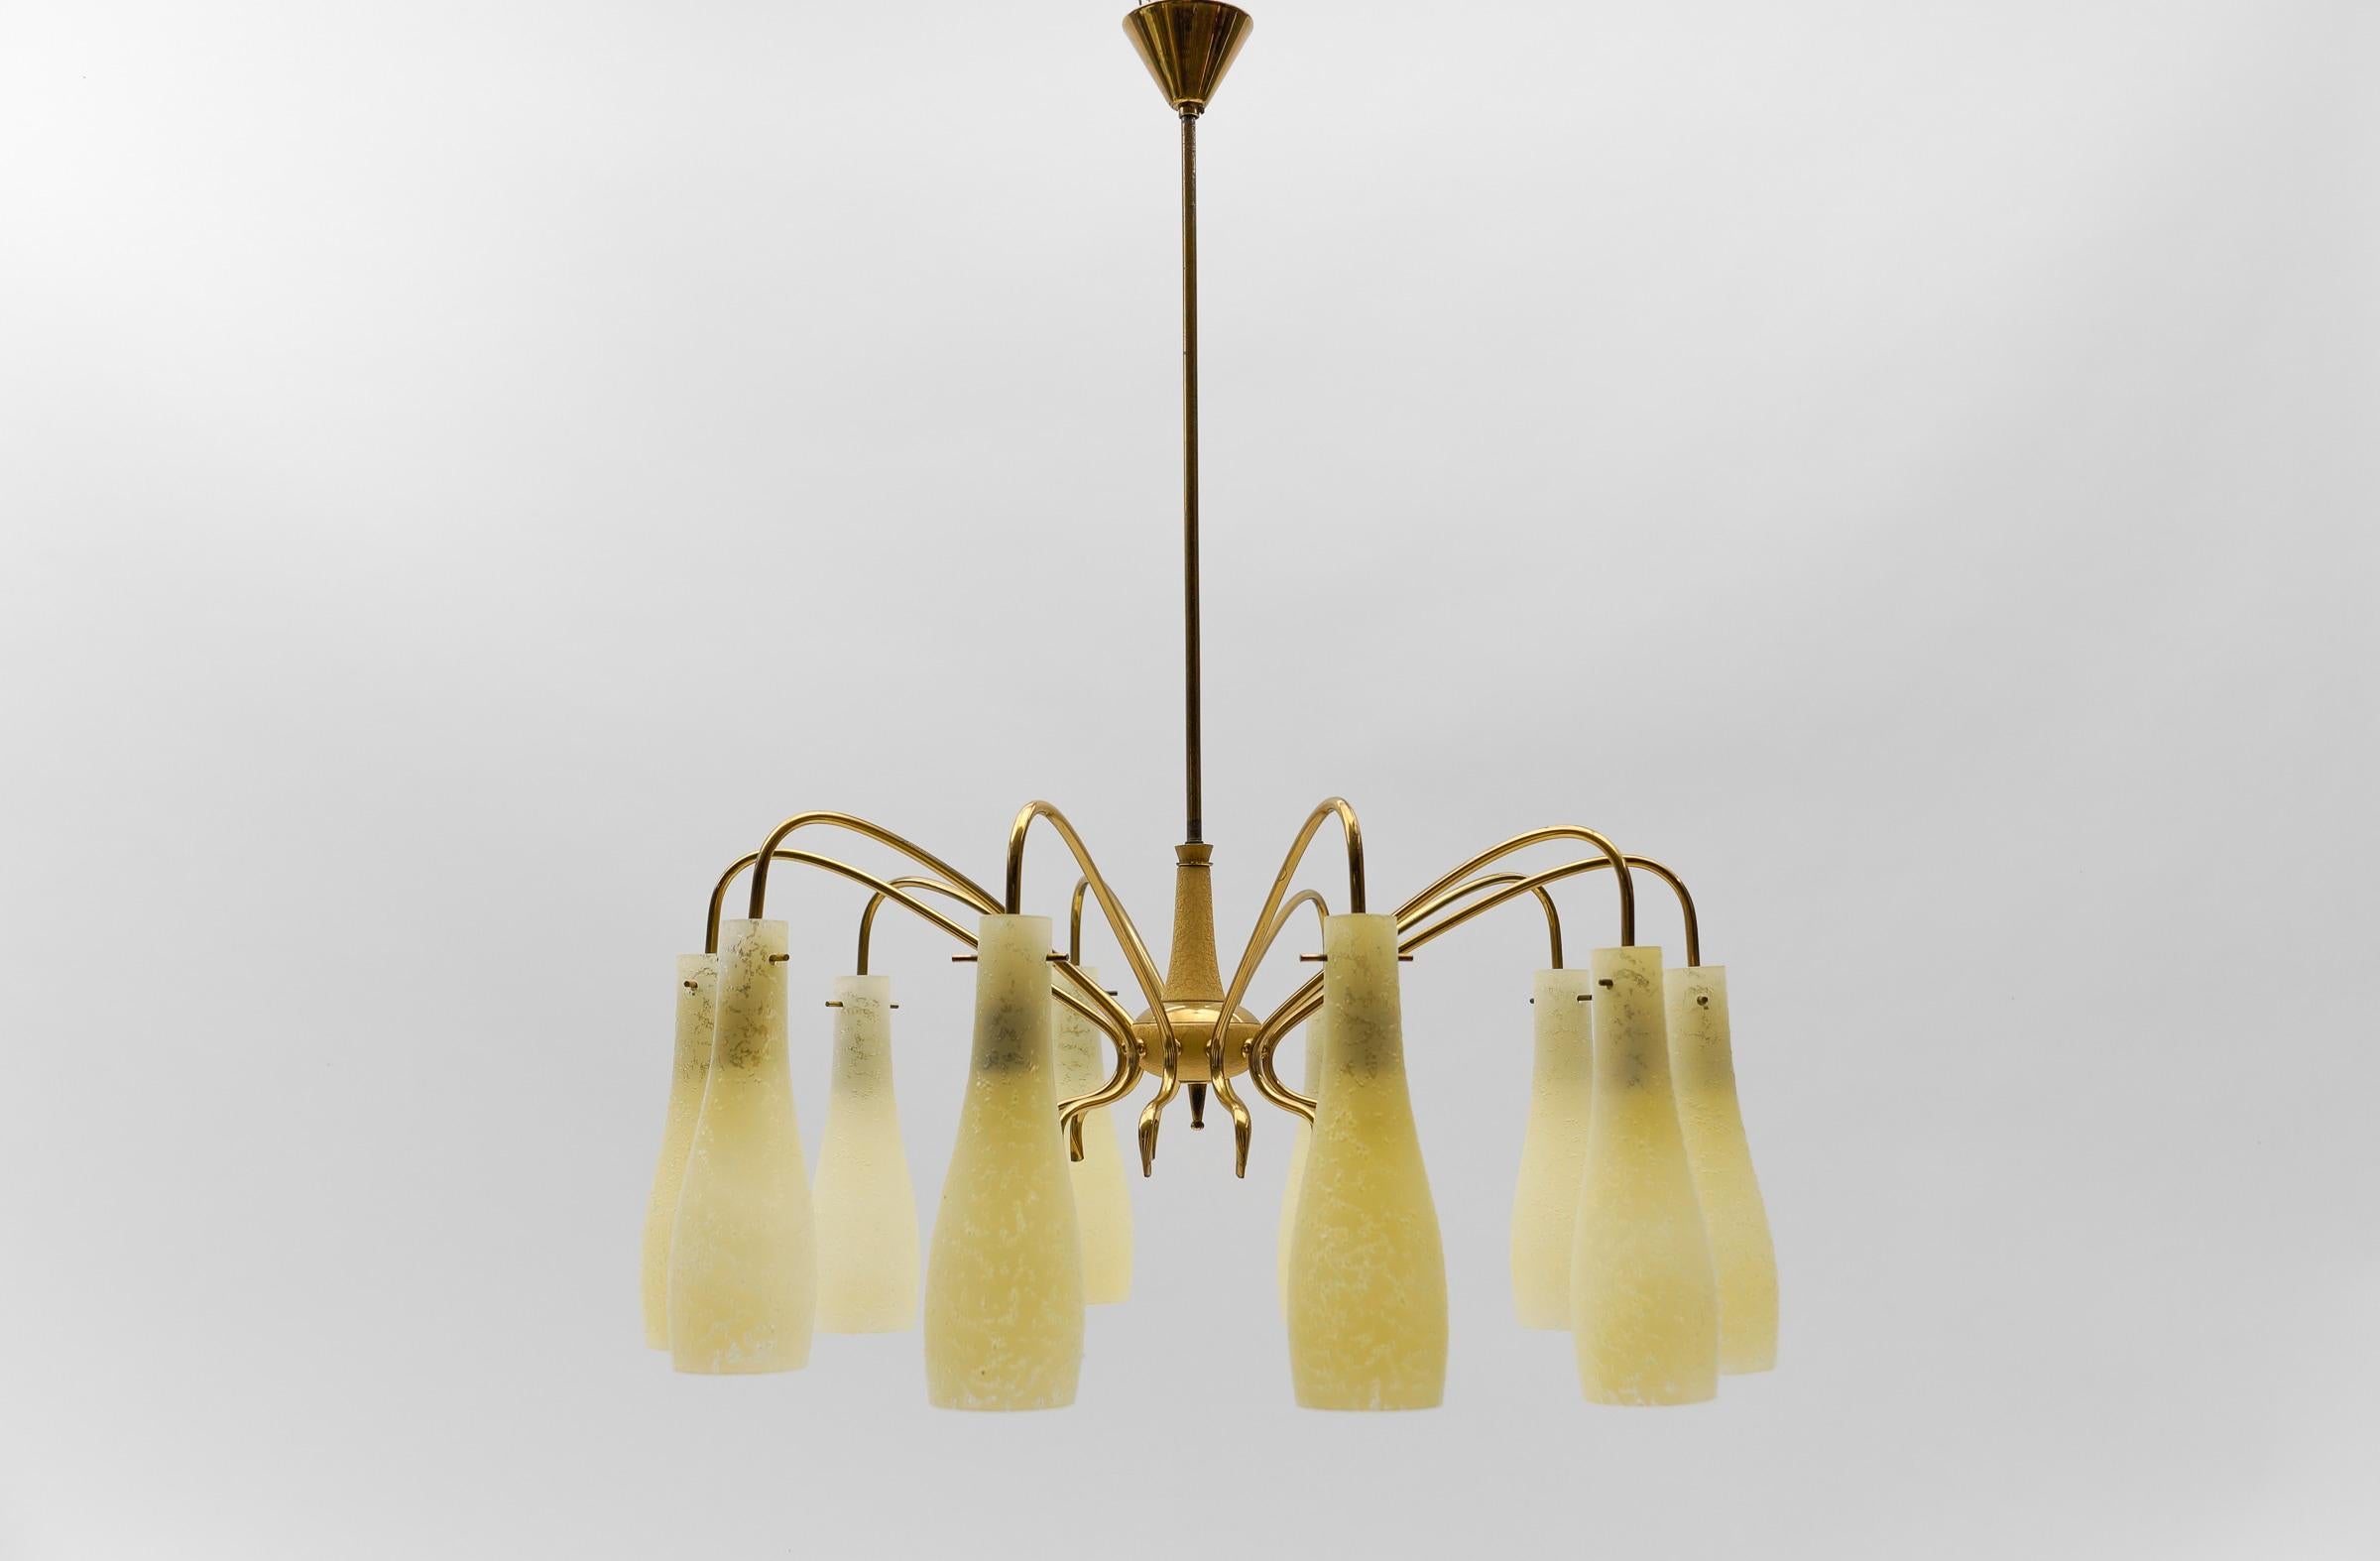 Mid-Century Modern 10-armed brass sputnik lamp from Italy, 1950s.

Fully functional.

Ten E14 sockets. Works with 220V and 110V.

Wiring is suitable for all countries.